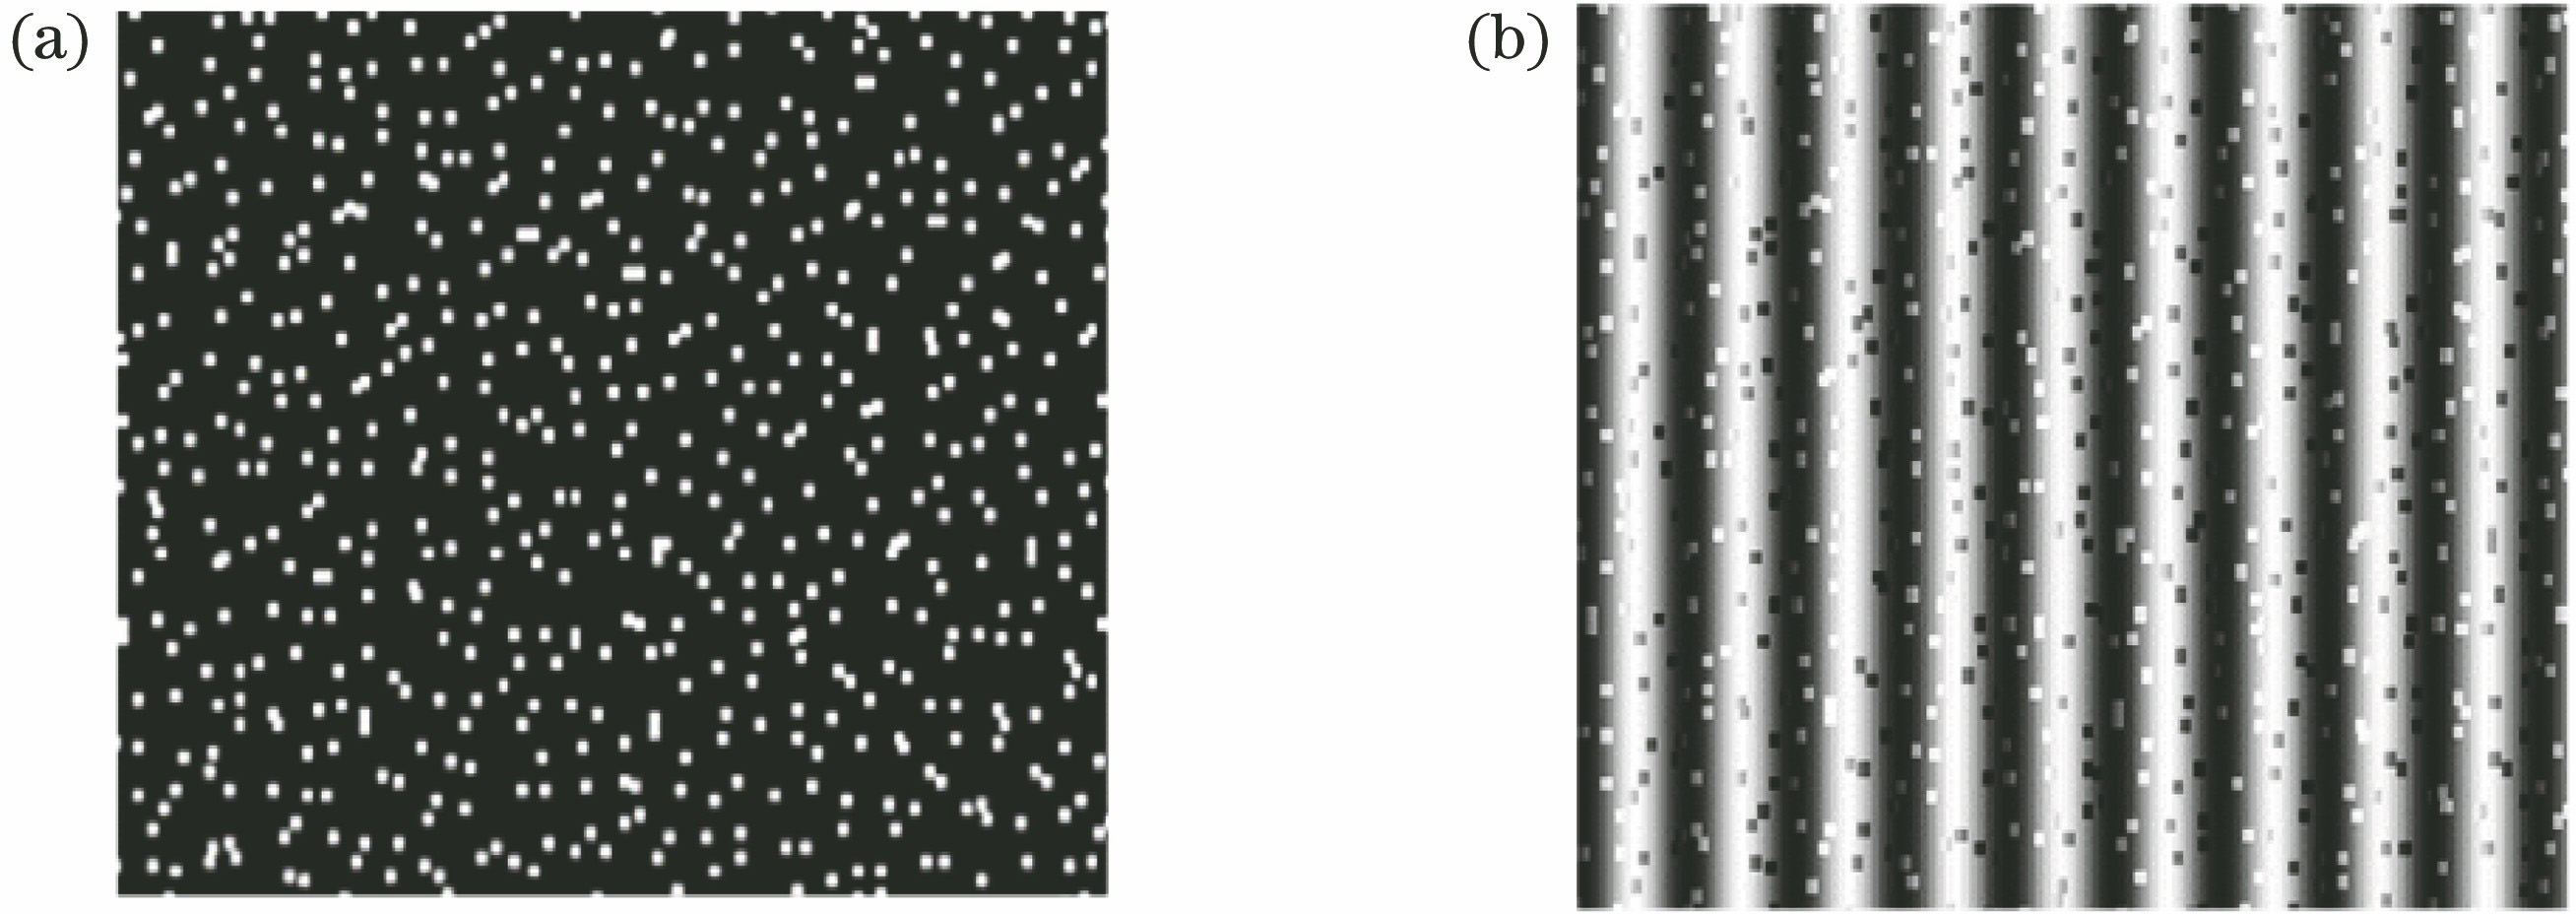 Generated projection patterns. (a) Embedded speckle pattern; (b) one of composite fringe patterns